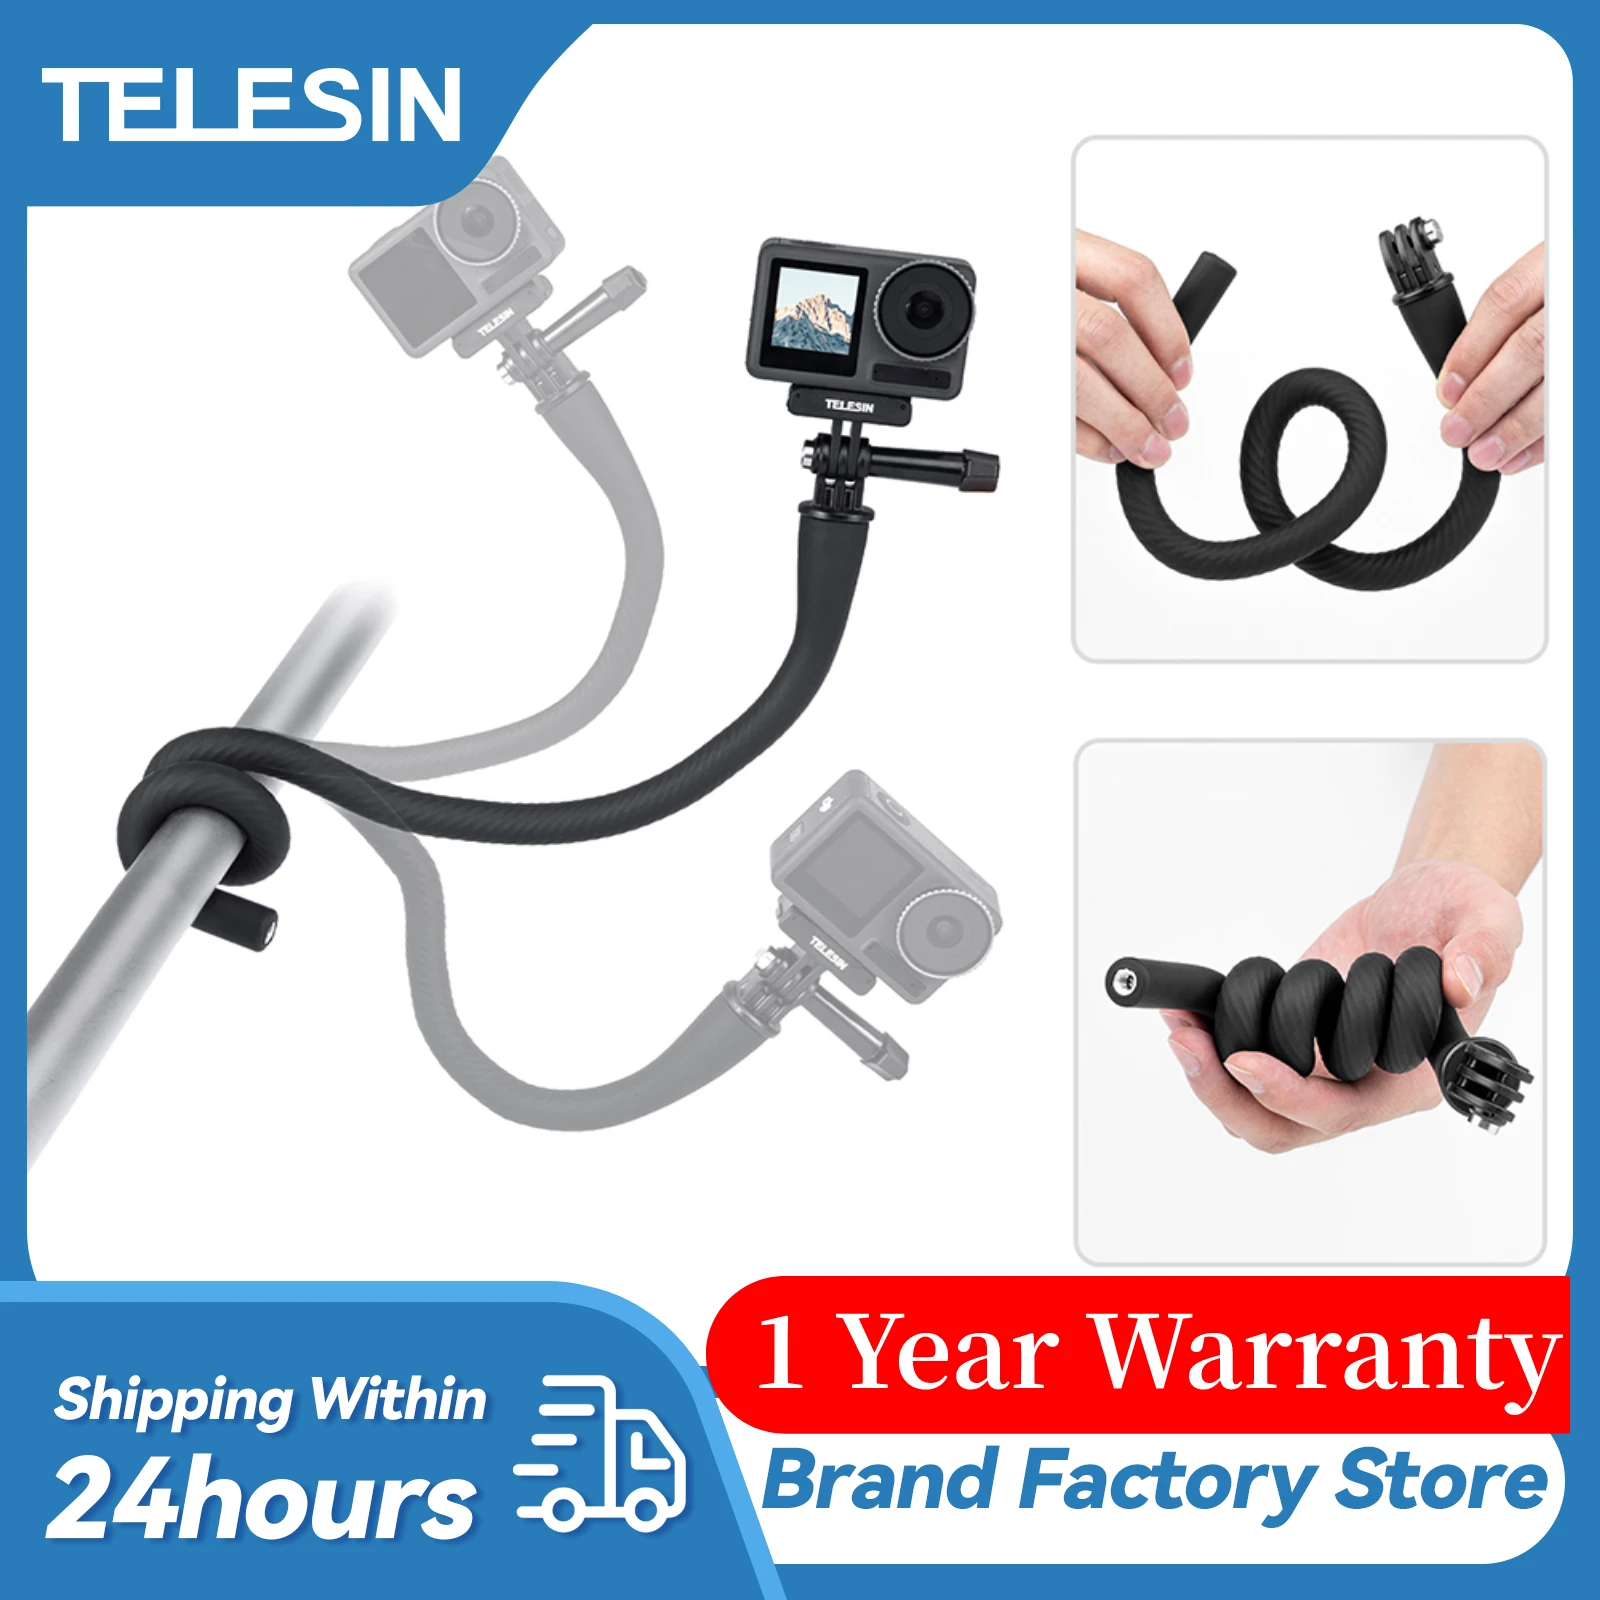 

TELESIN Flexible Selfie Stick Monopod Tripod for GoPro insta360 Wherever Without Any Tools for IPhone Camera Phone Universal